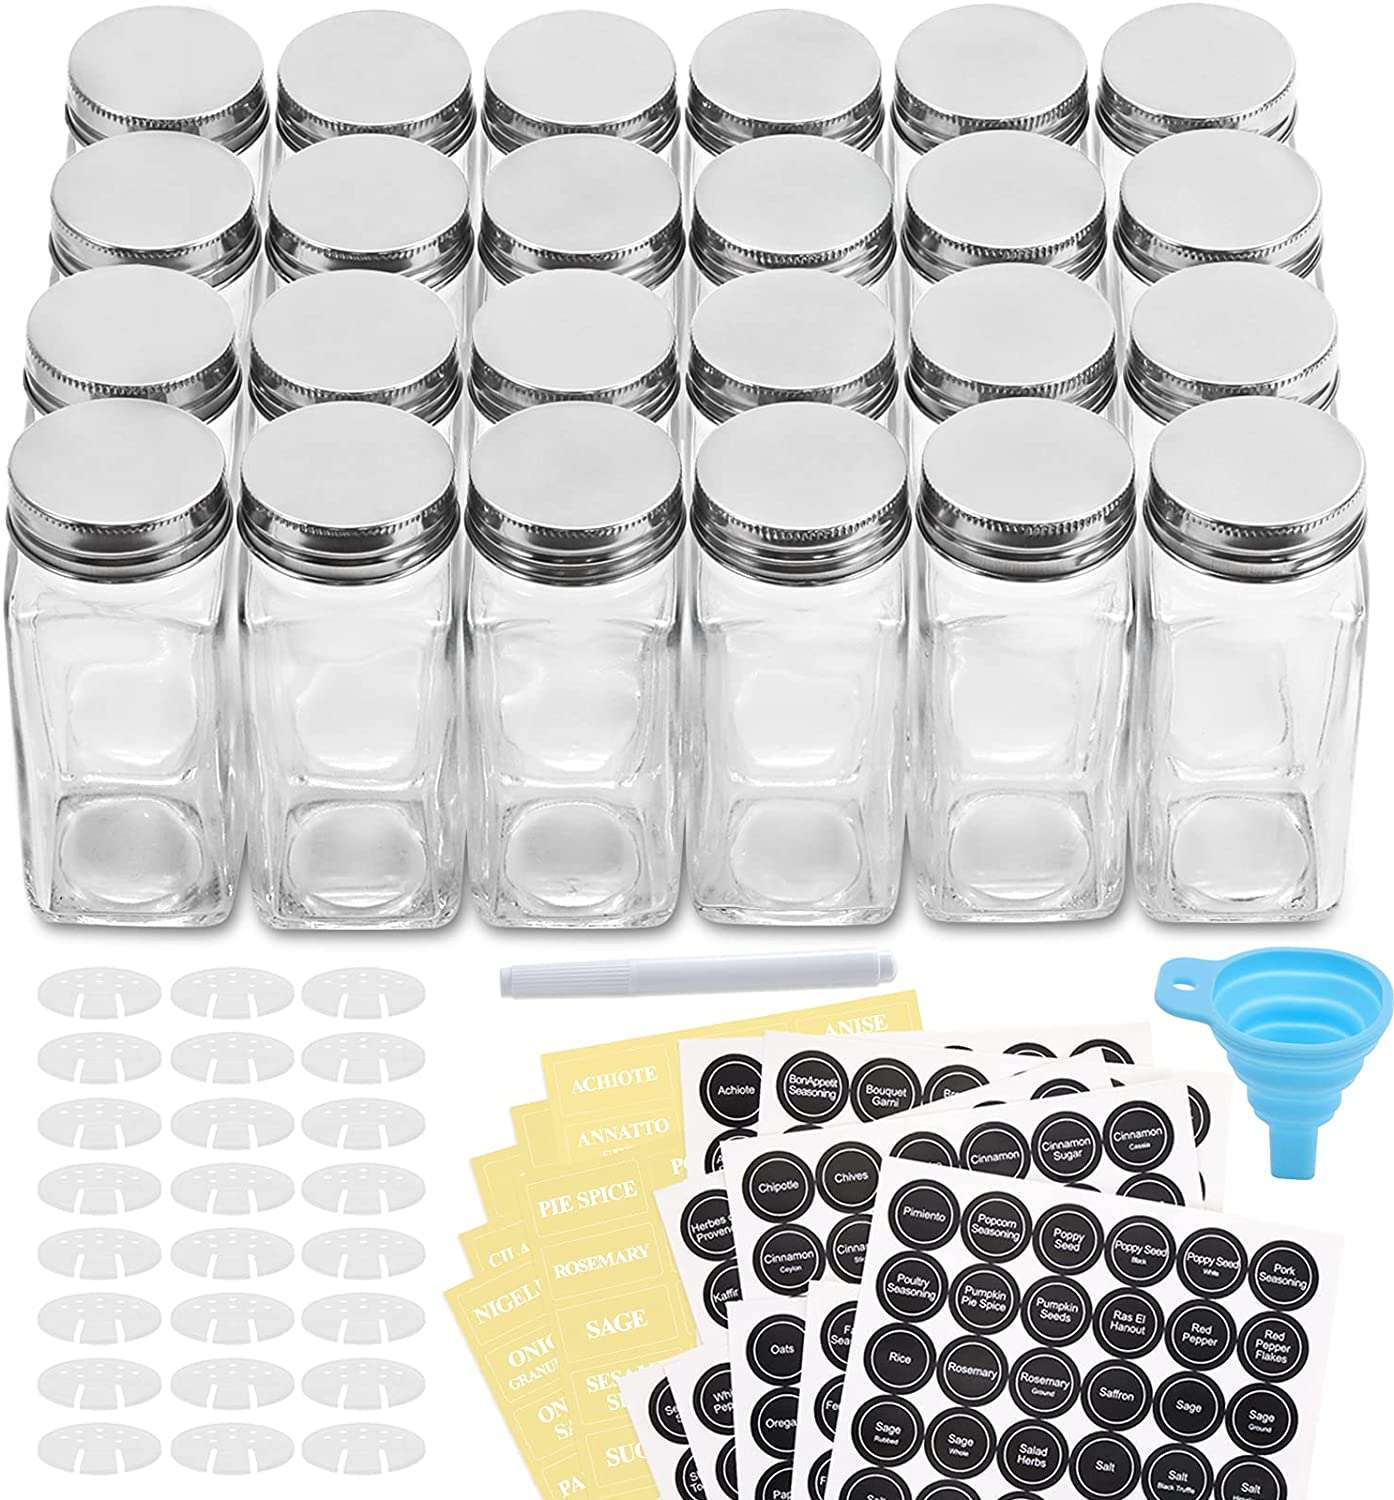 24 Pcs, 4oz Glass Spice Jars/Bottles With Spice Labels, Shaker Lids & Airtight Metal Caps - Silicone Collapsible Funnel Included